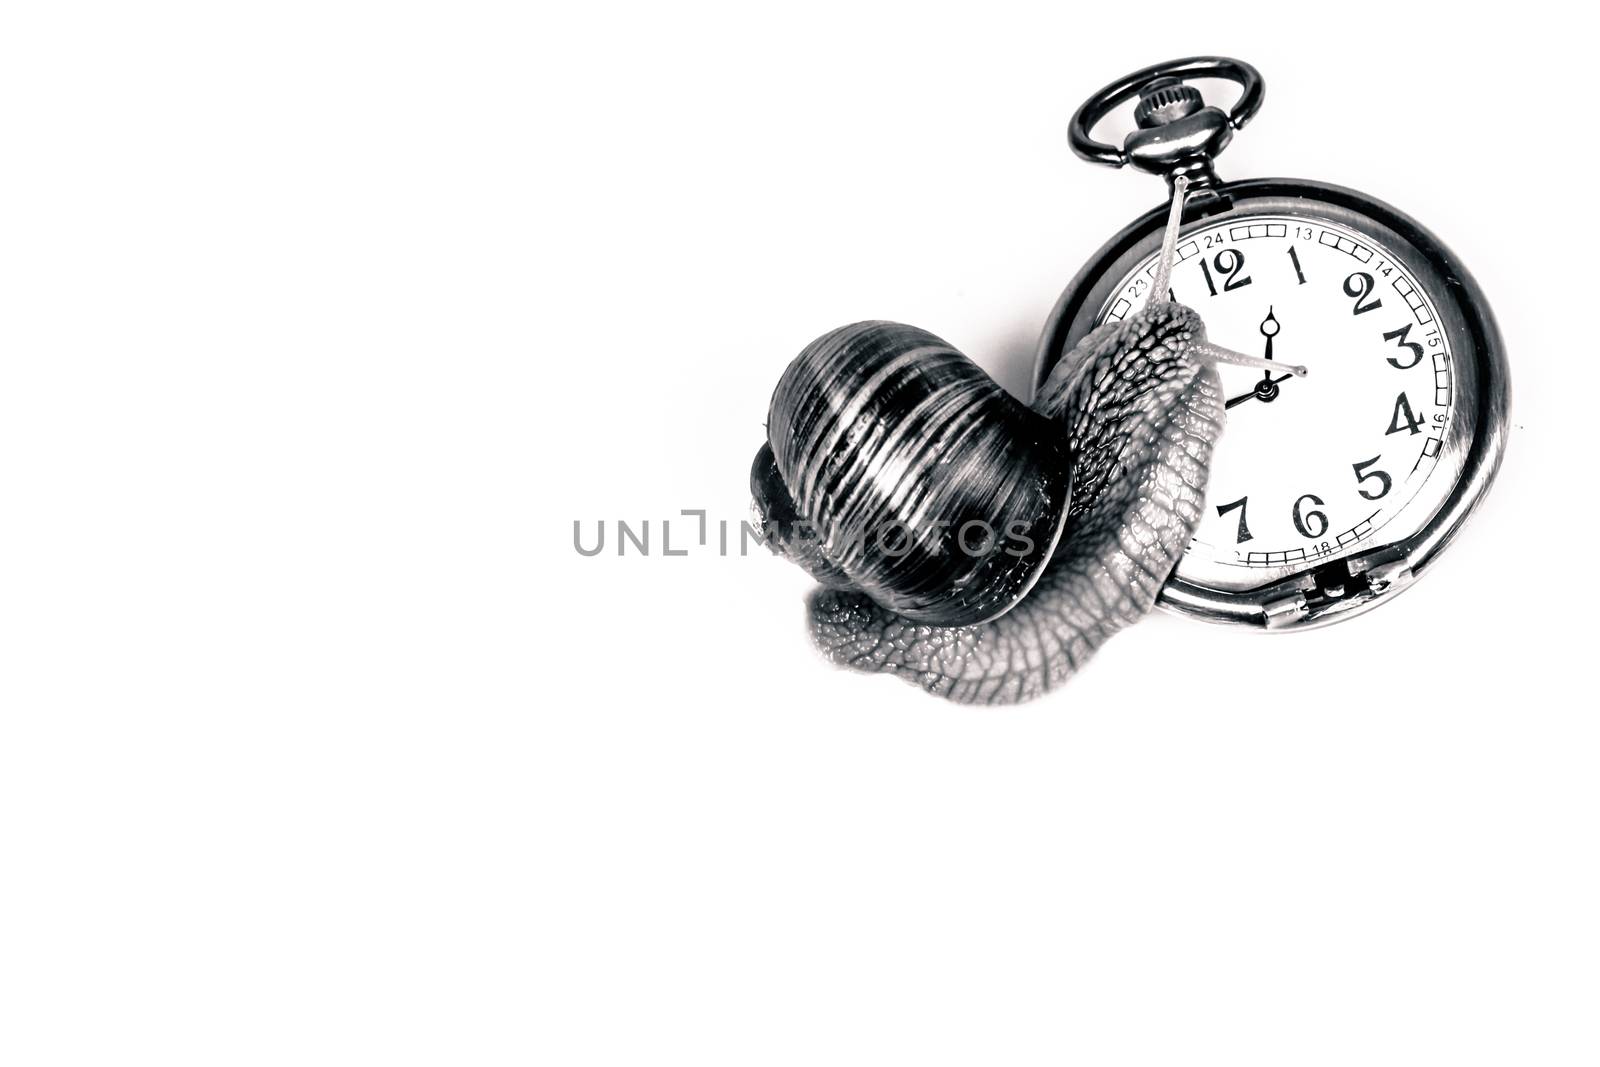 Snail and time by Sportactive